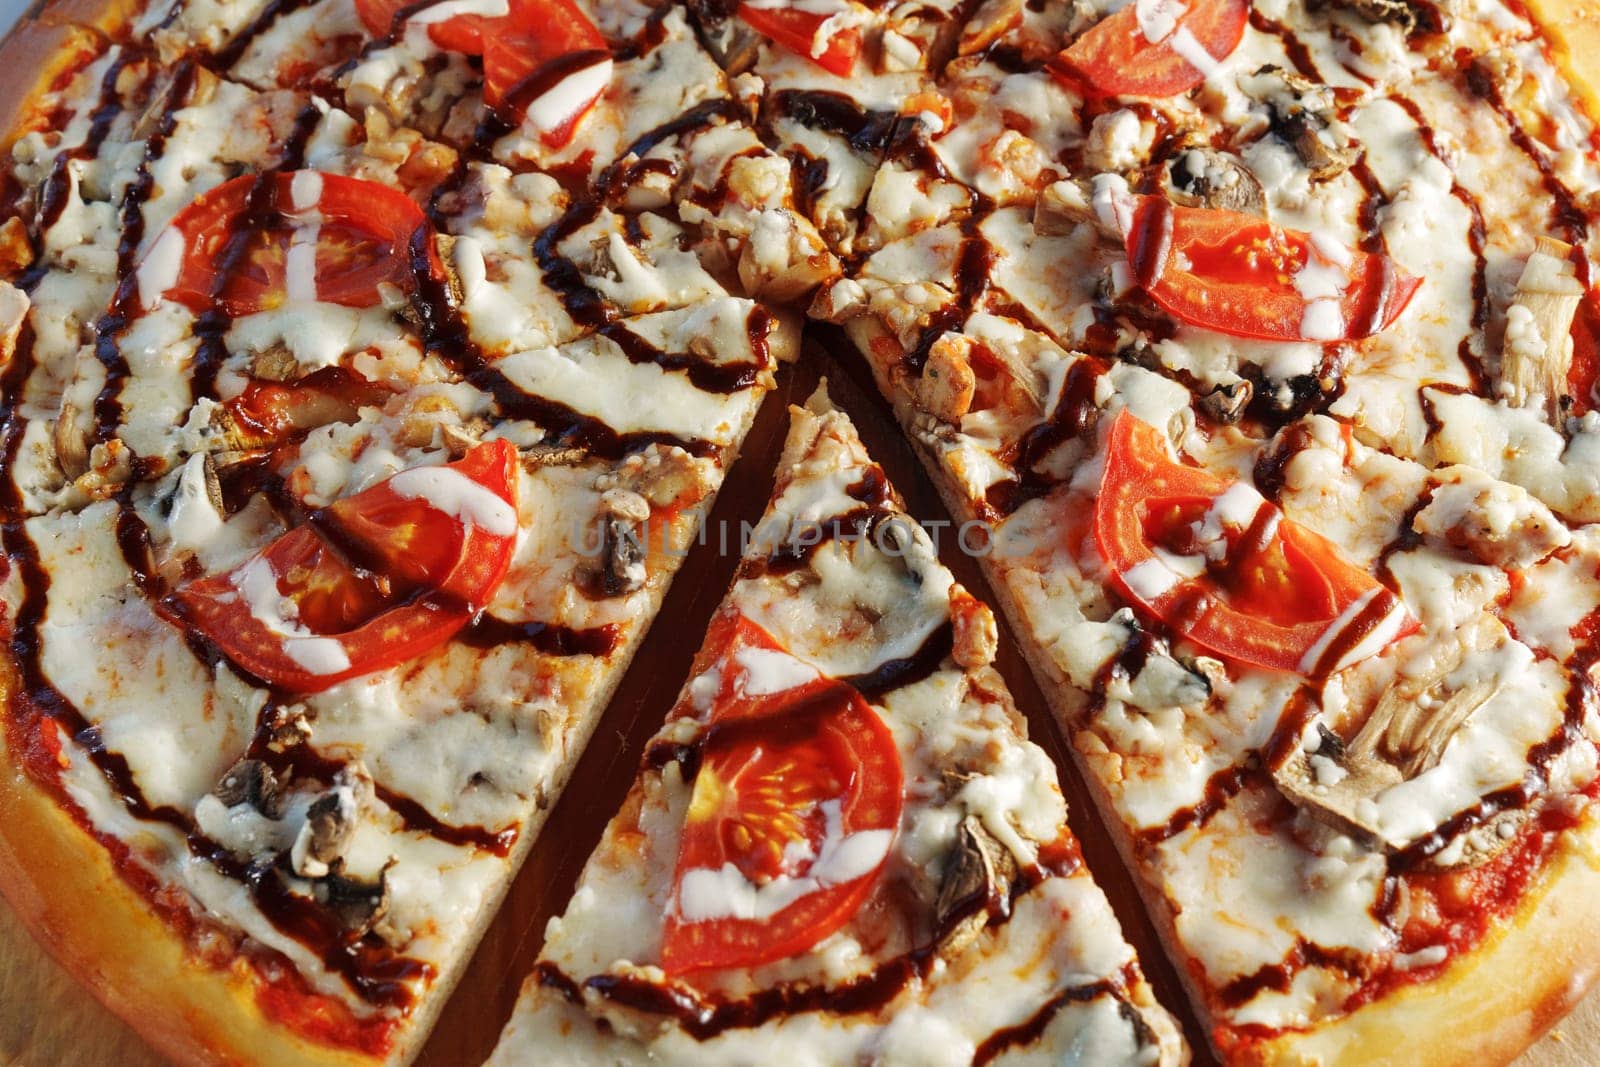 Gourmet Tomato and Mushroom Pizza Delight on Wooden Board